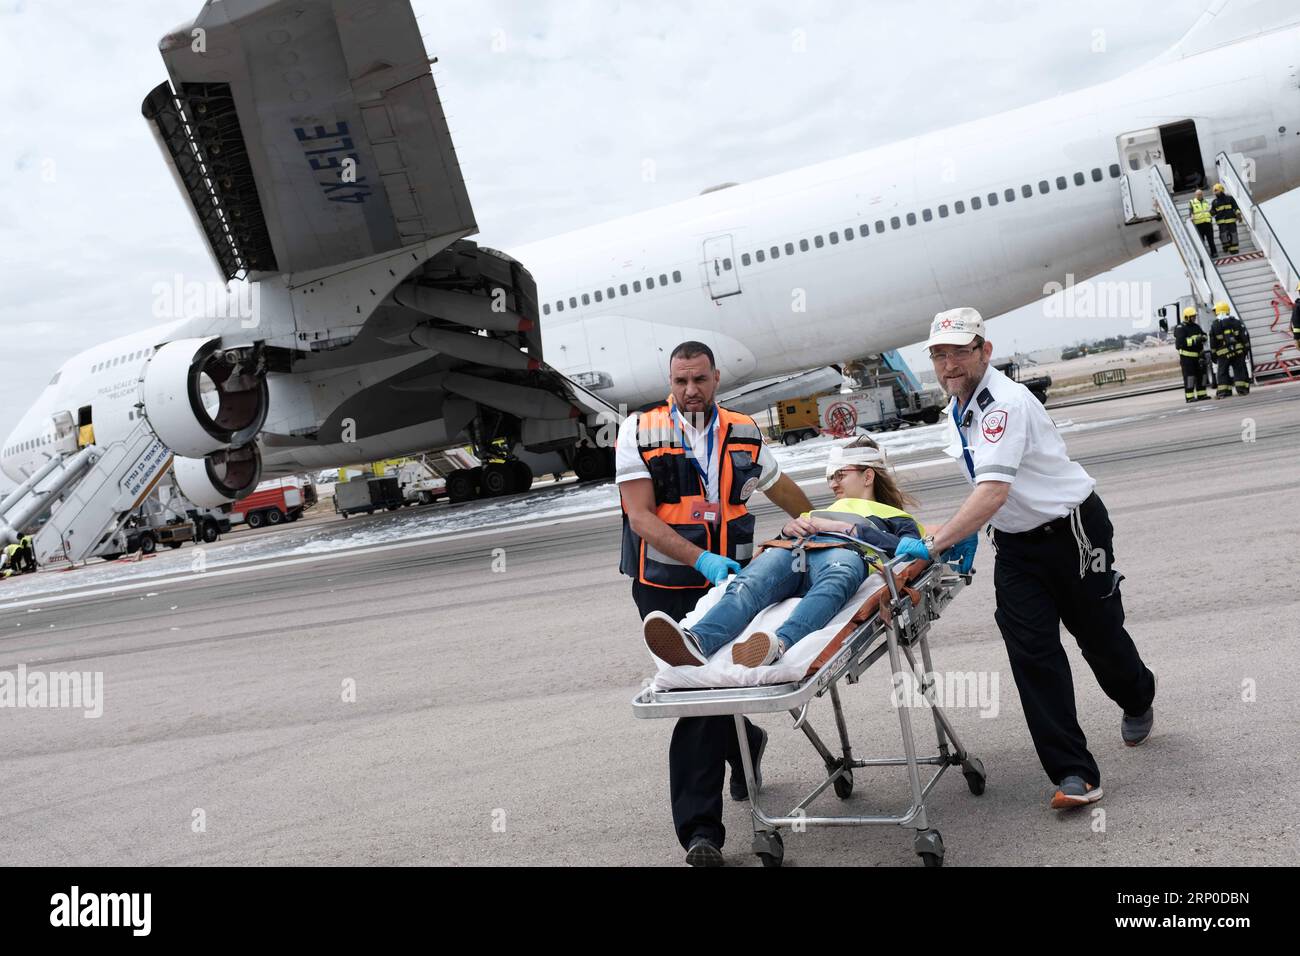 (180508) -- TEL AVIV, May 8, 2018 -- People take part in the Pelican emergency drill at Ben Gurion International Airport near Tel Aviv, Israel, on May 8, 2018. Ben Gurion International Airport carried out on Tuesday a large scale emergency drill simulating an emergency landing by a Boeing 747-400 jumbo jet carrying hundreds of passengers. Around 1,000 representatives of the airport, the defense and health ministries, the air force, police, emergency services and the IDF Home Front Command took part in the drill. ) (zxj) ISRAEL-TEL AVIV-AIRPORT-EMERGENCY DRILL TomerxNeuberg-JINI PUBLICATIONxNOT Stock Photo